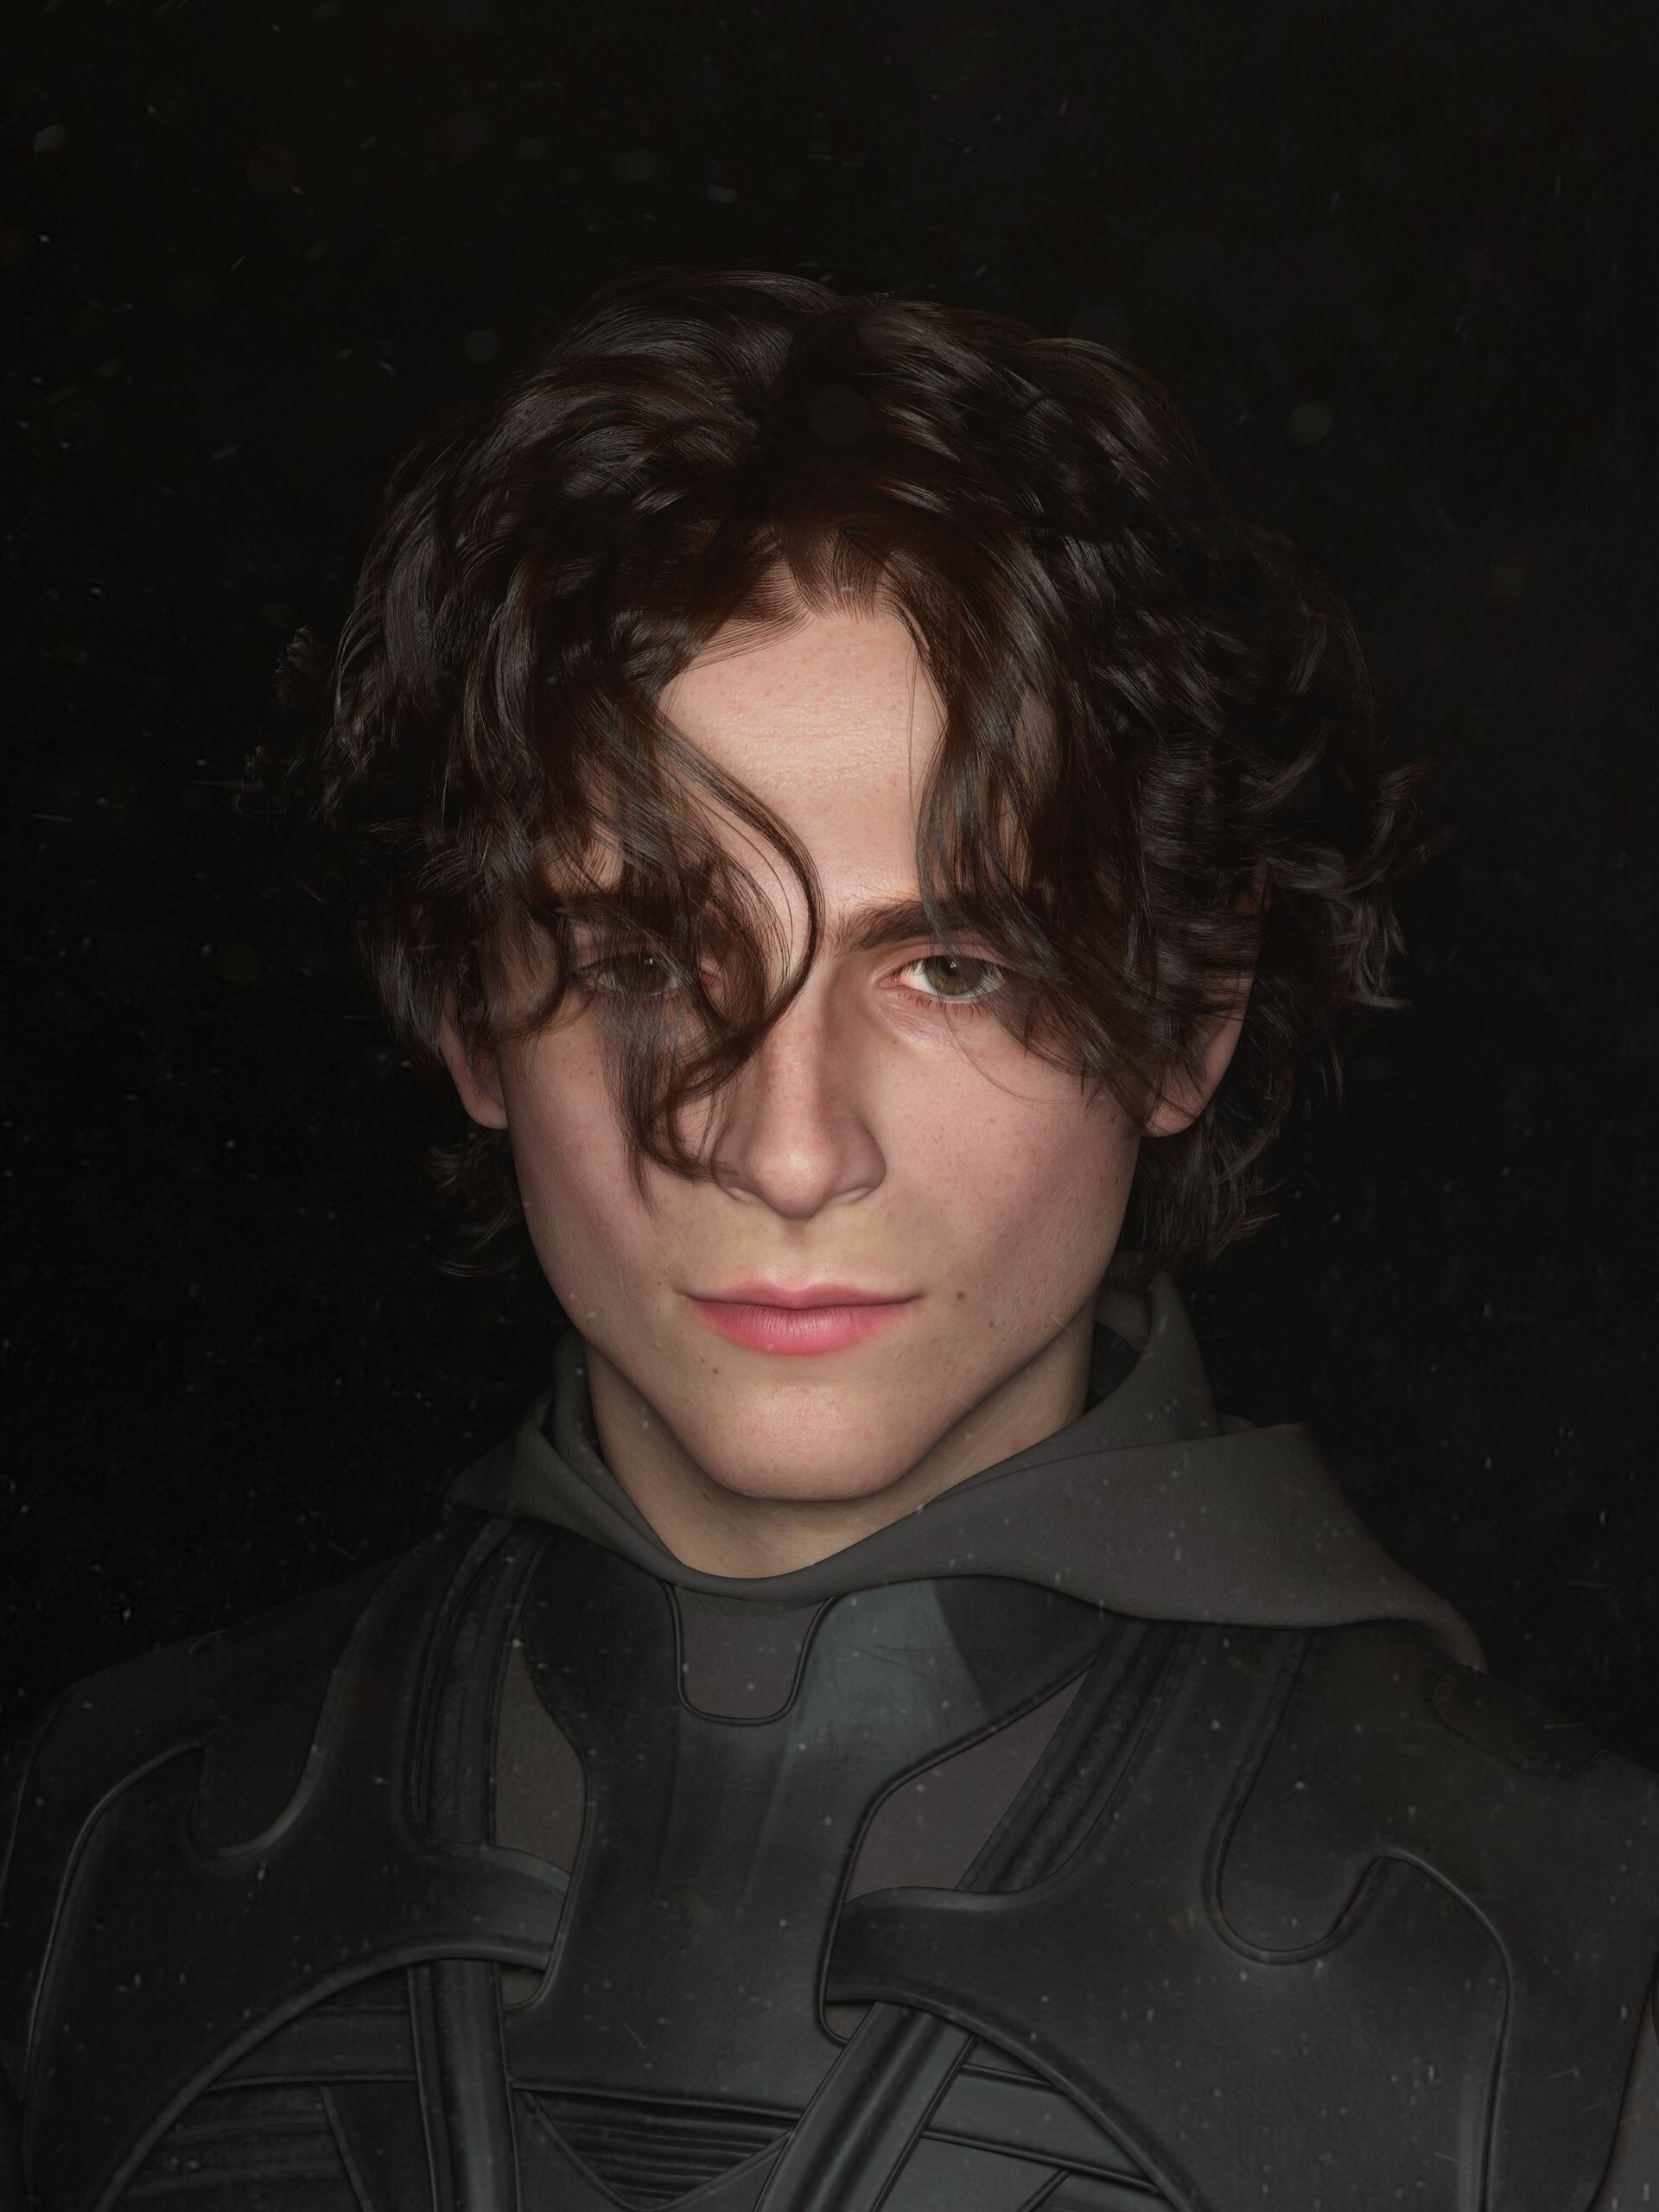 Timothee Chalamet: Dune, Co-starred as Zac in Andrew Droz Palermo's fantasy thriller One and Two. 1920x2560 HD Wallpaper.